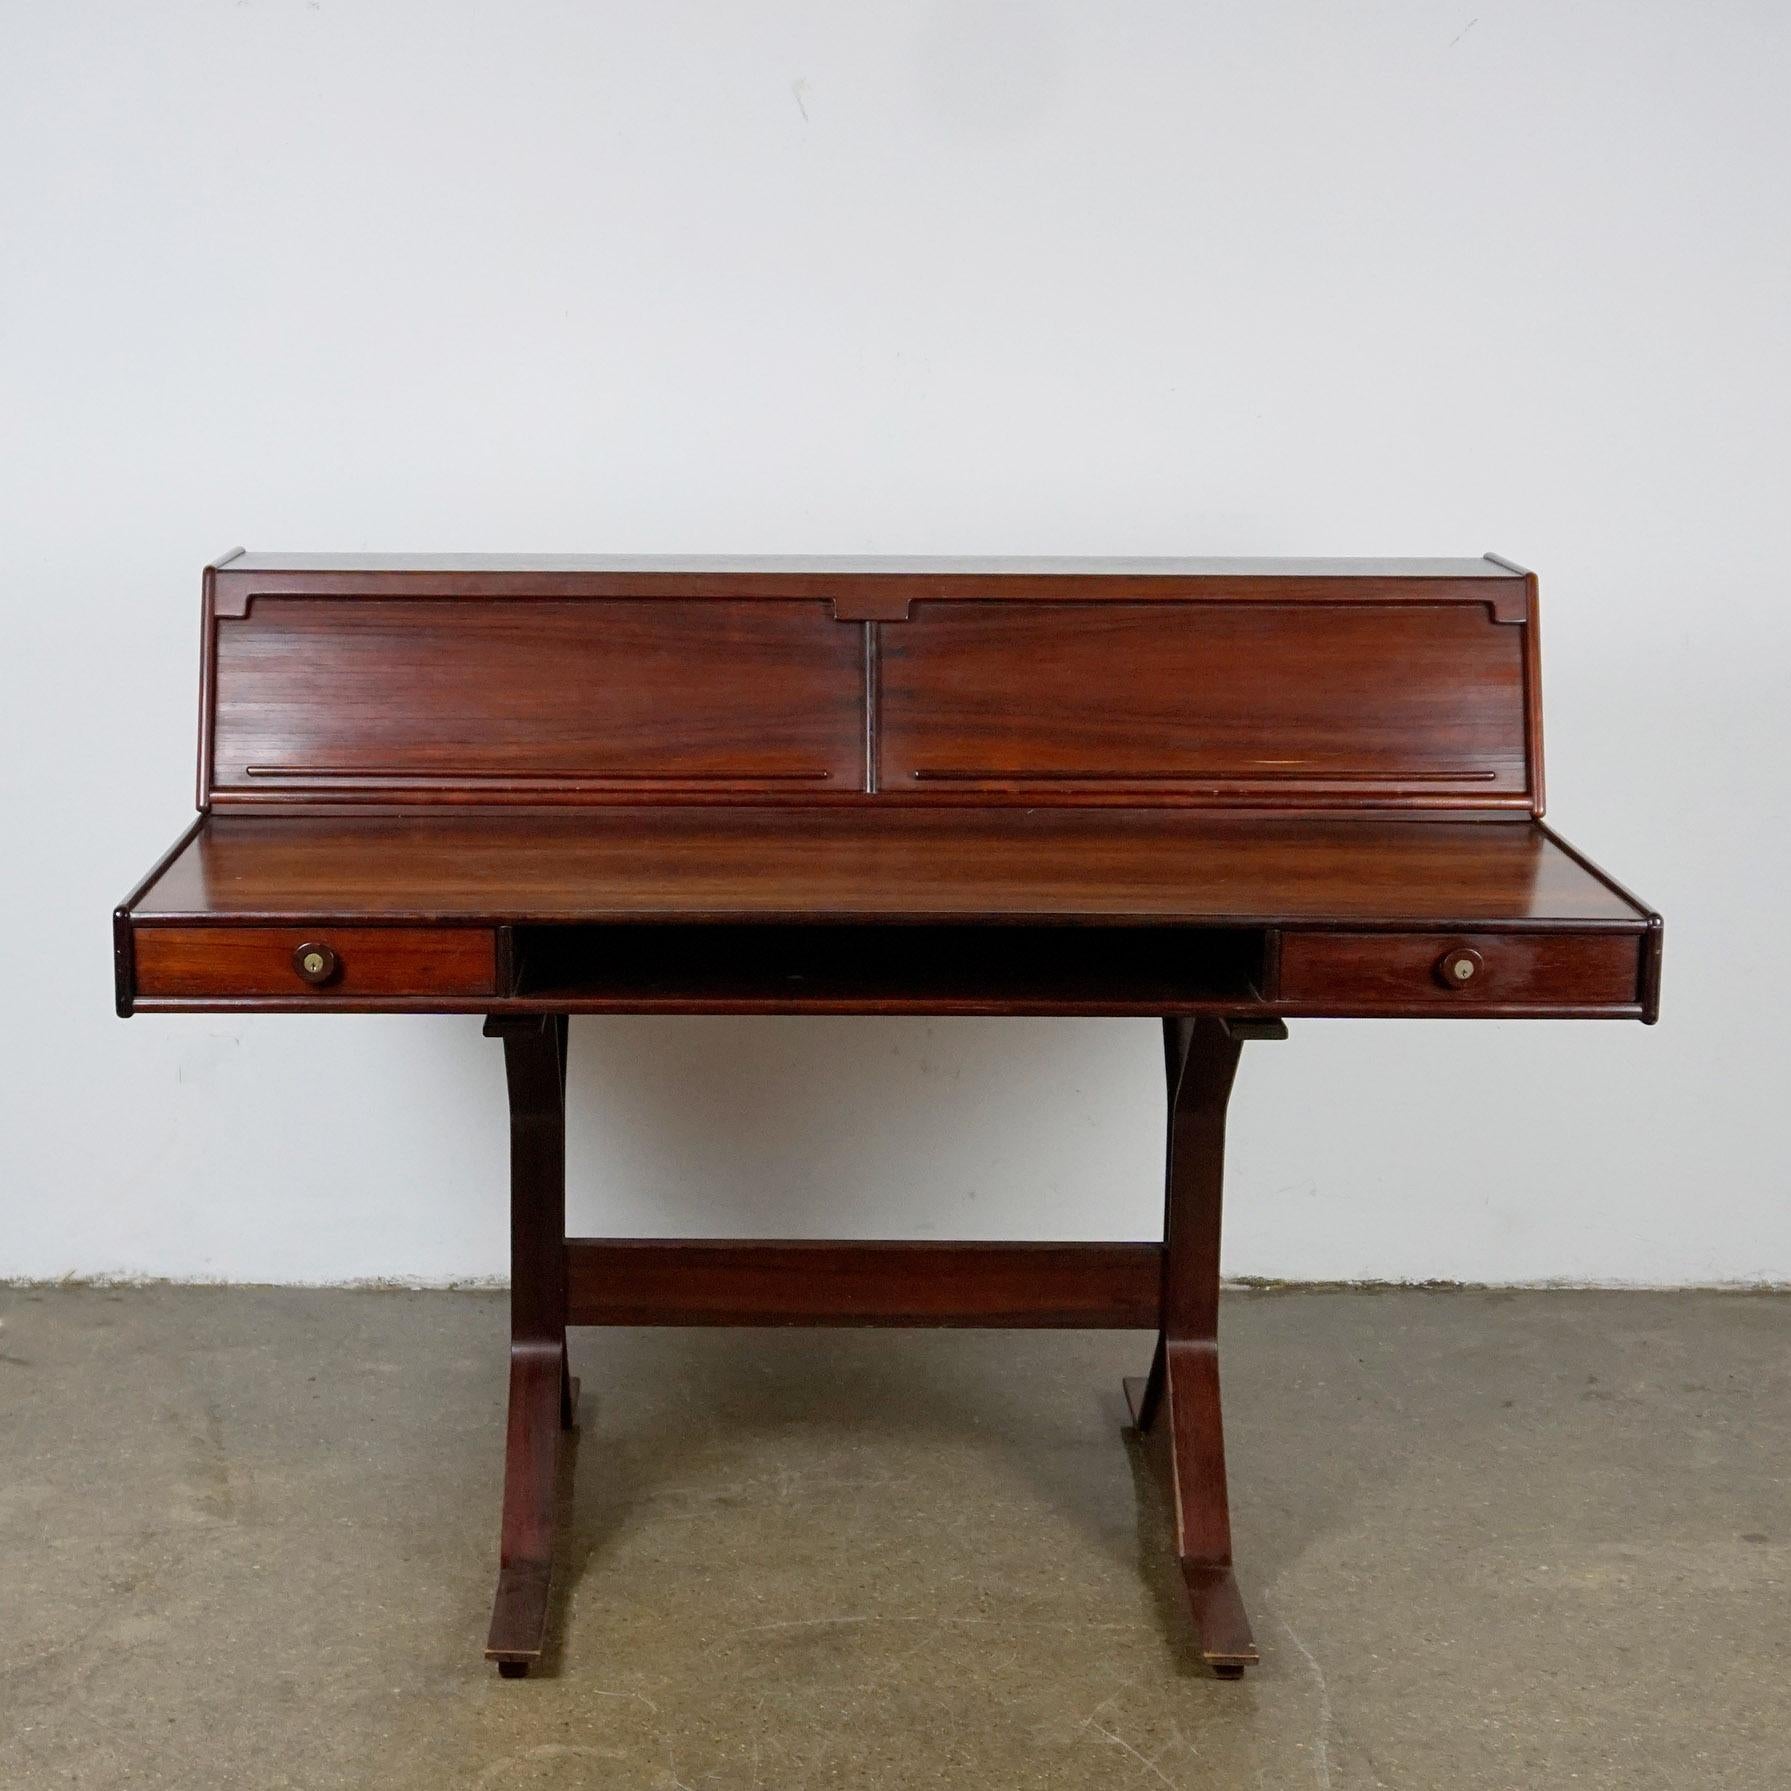 This excellent Italian Midcentury rosewood writing desk has been designed by Gianfranco Frattini for Bernini, Italy 1957, Modell No. 530.
It is made of beautifully grained rosewood and features a removable storage unit with tambour doors on top,